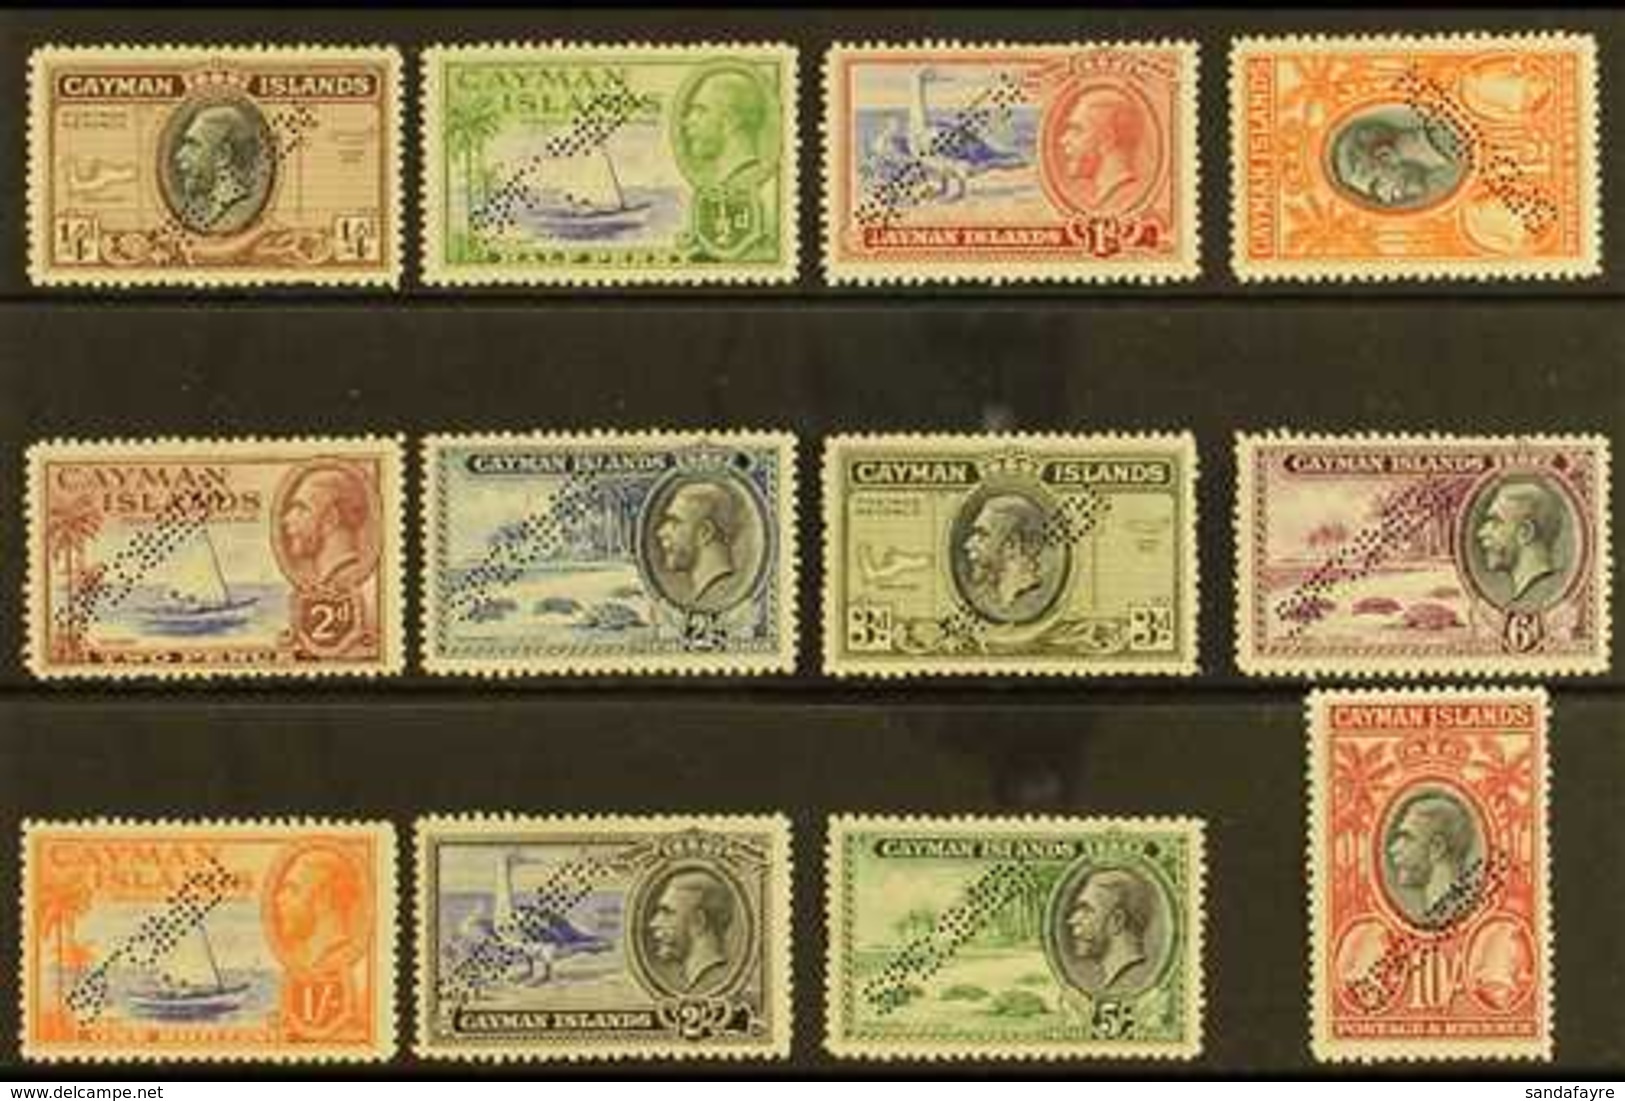 1935 Pictorial Definitives Complete Set With "SPECIMEN" Perfin, SG 96s/107s, ½d Value With Small Thin, Otherwise Fine Mi - Kaimaninseln